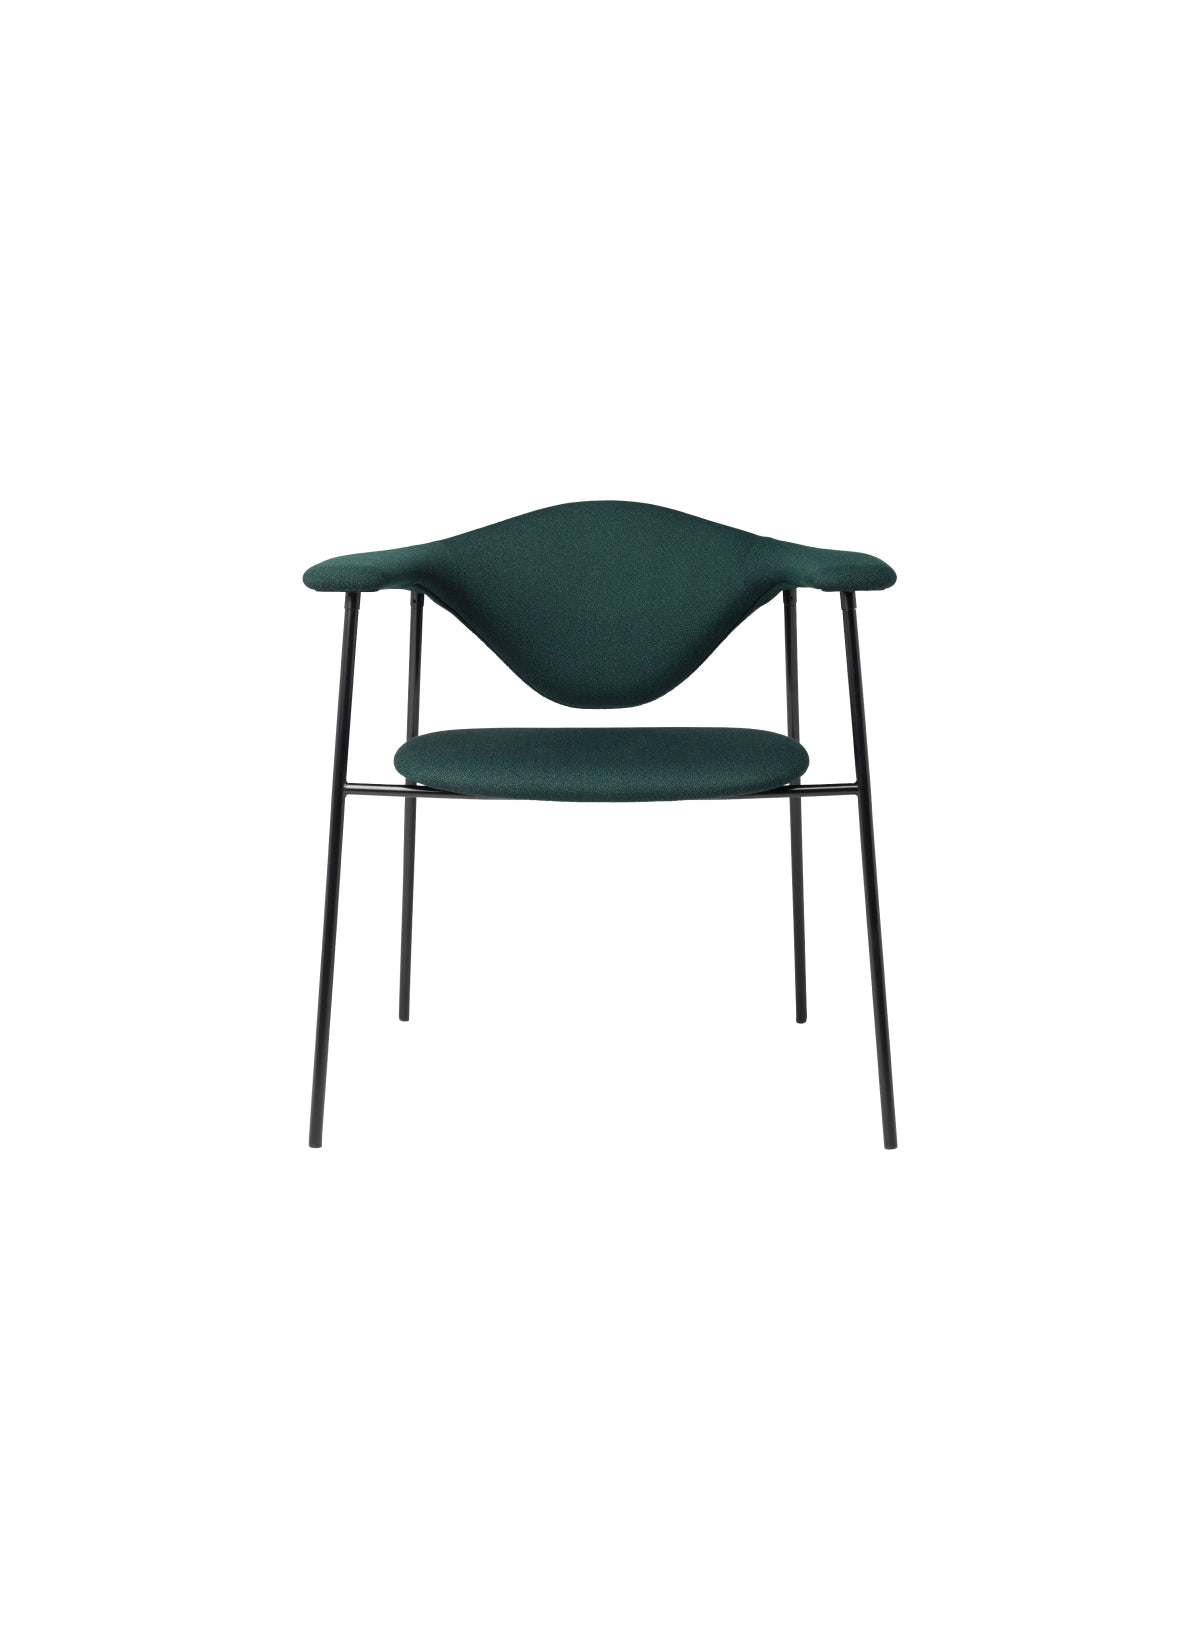 Masculo Dining Chair - 4-Leg by Gubi